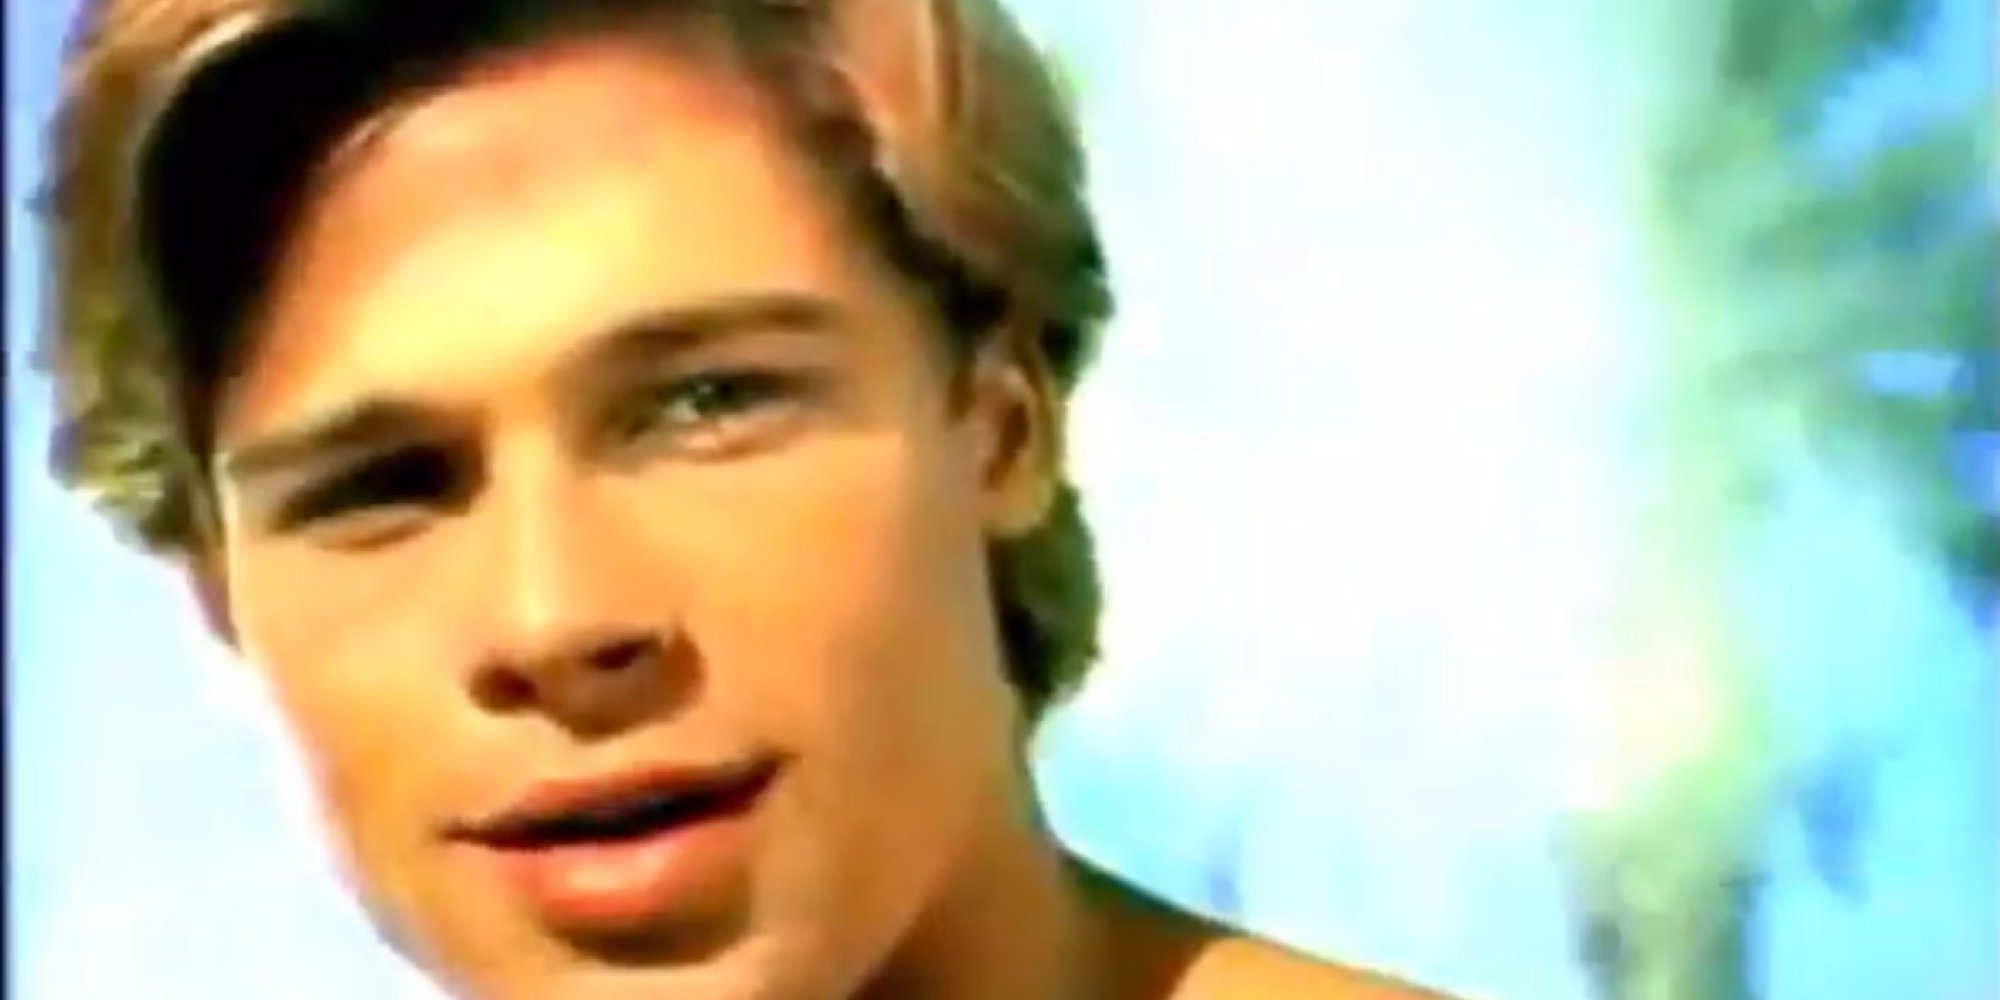 You Know, Just Brad Pitt In An '80s Pringles Commercial2000 x 1000